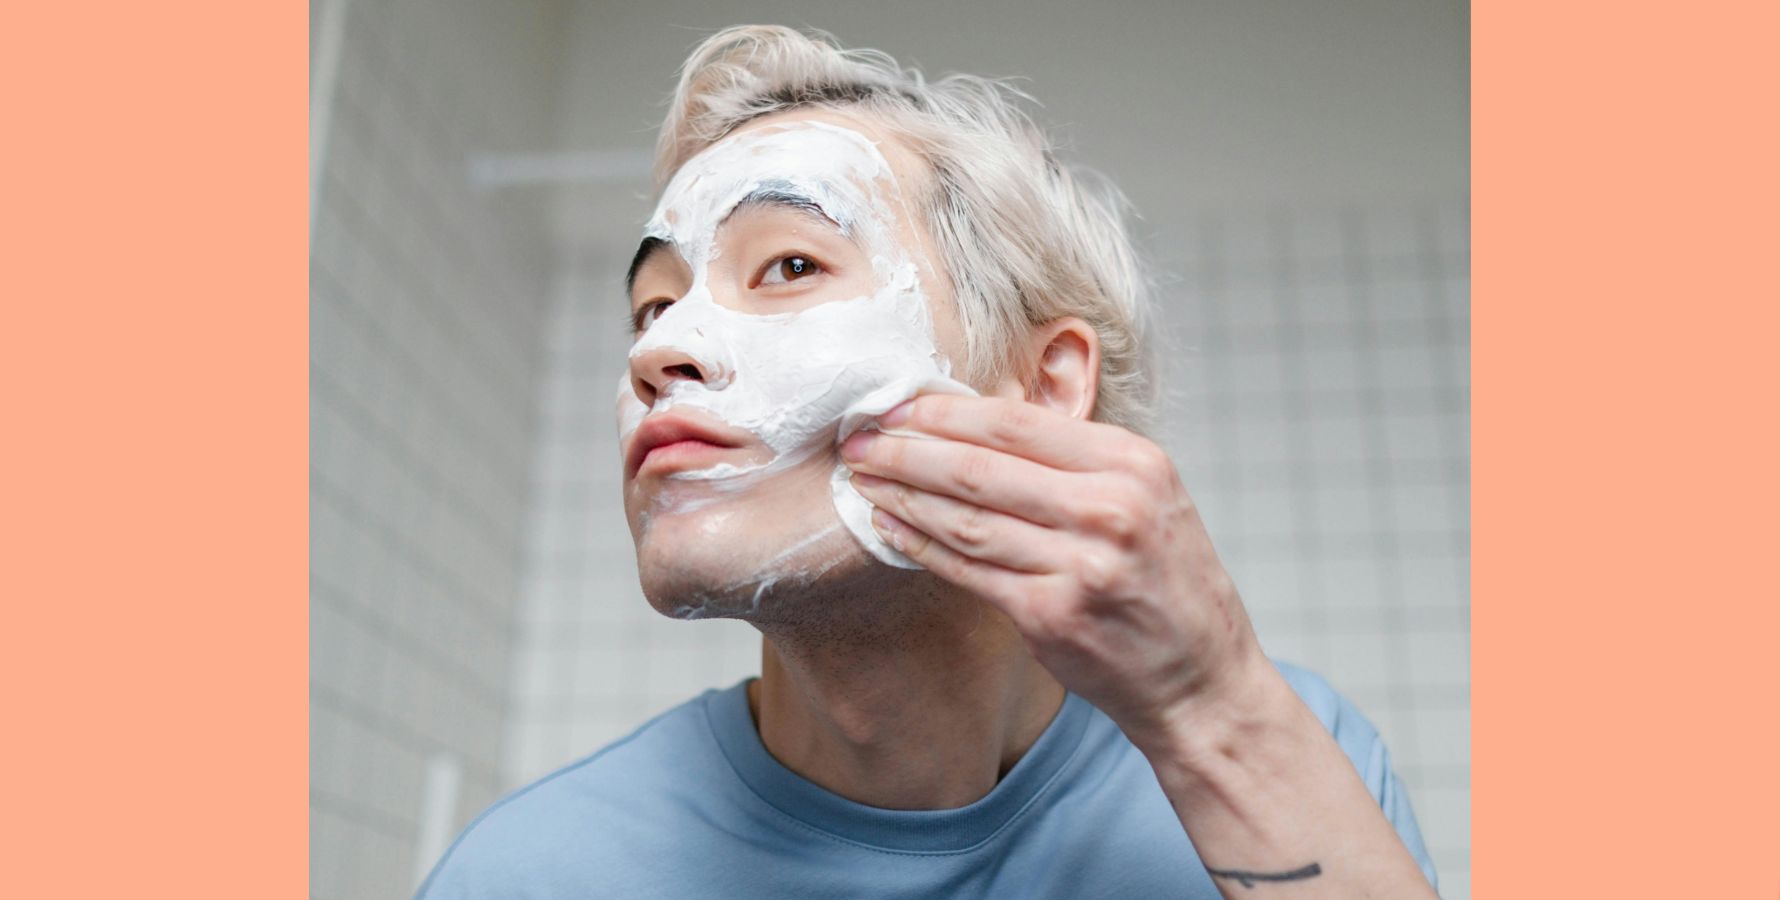 CERM Skin Acne dos and don'ts. Young man removing facial mask. Image: Pexels.com/Ron Lach